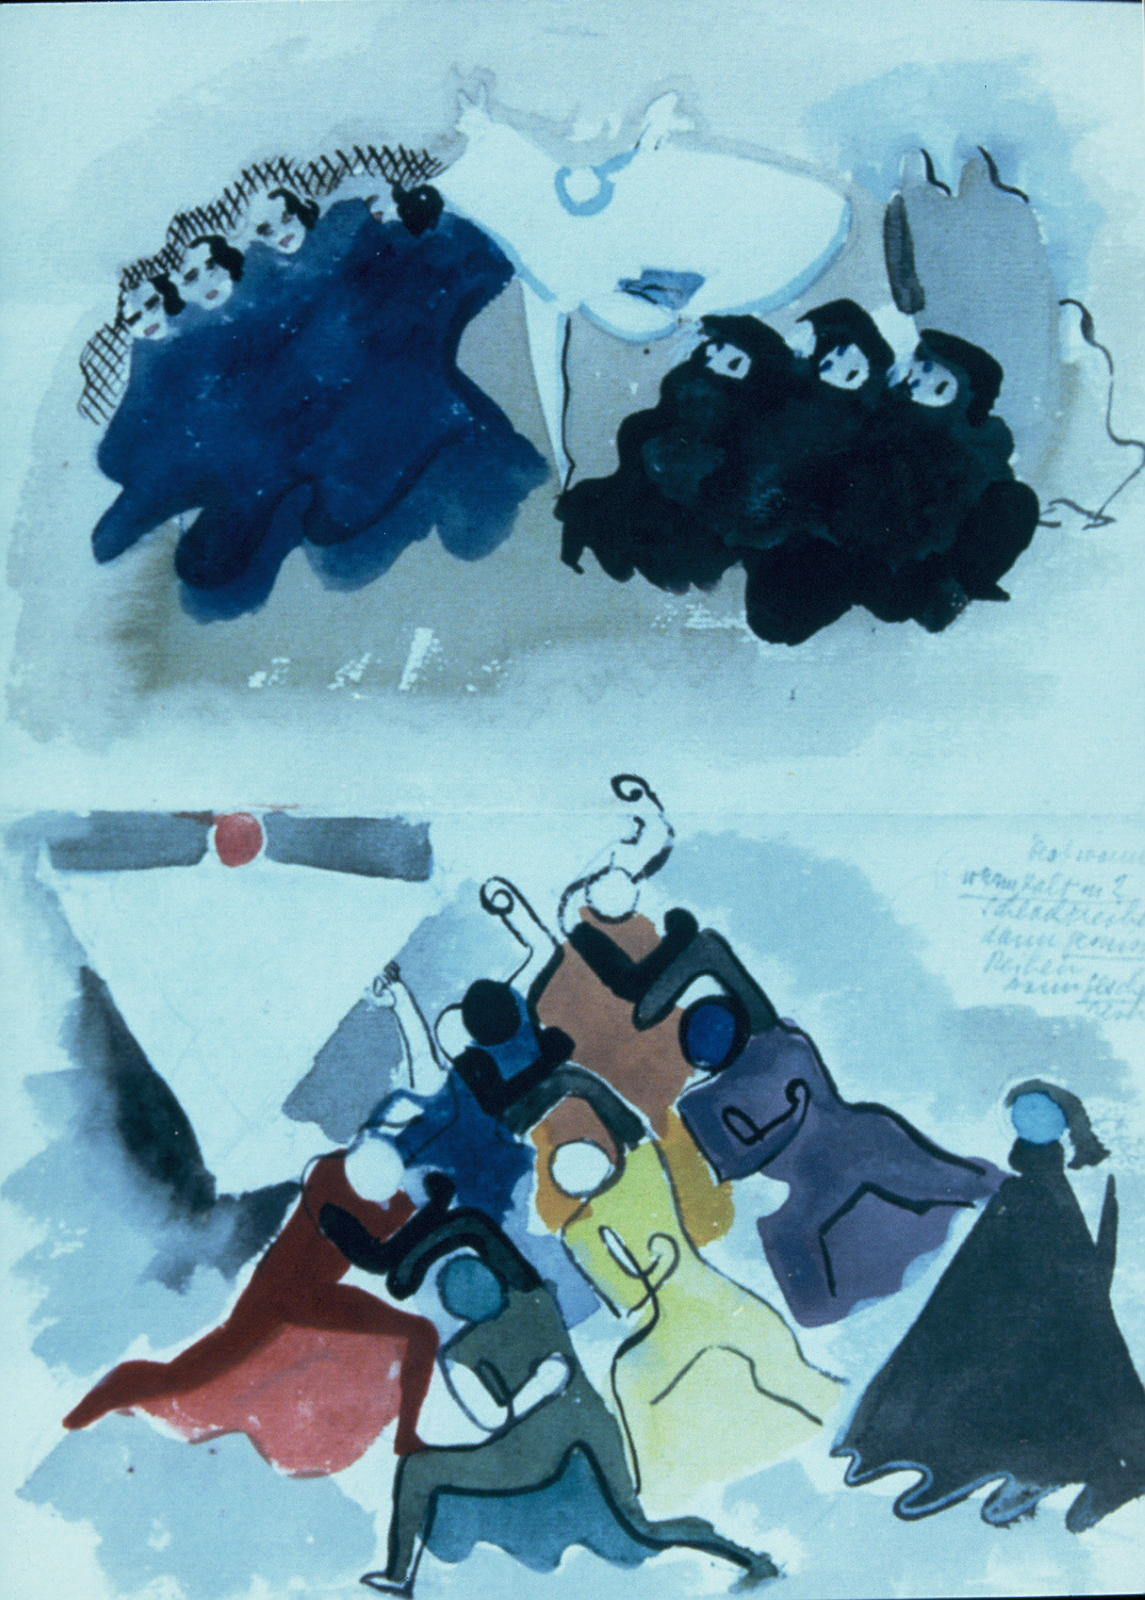 Watercolor painting shows 3 people in blue standing, 3 in black sitting and 7 in a variety of colors perhaps dancing or fighting.